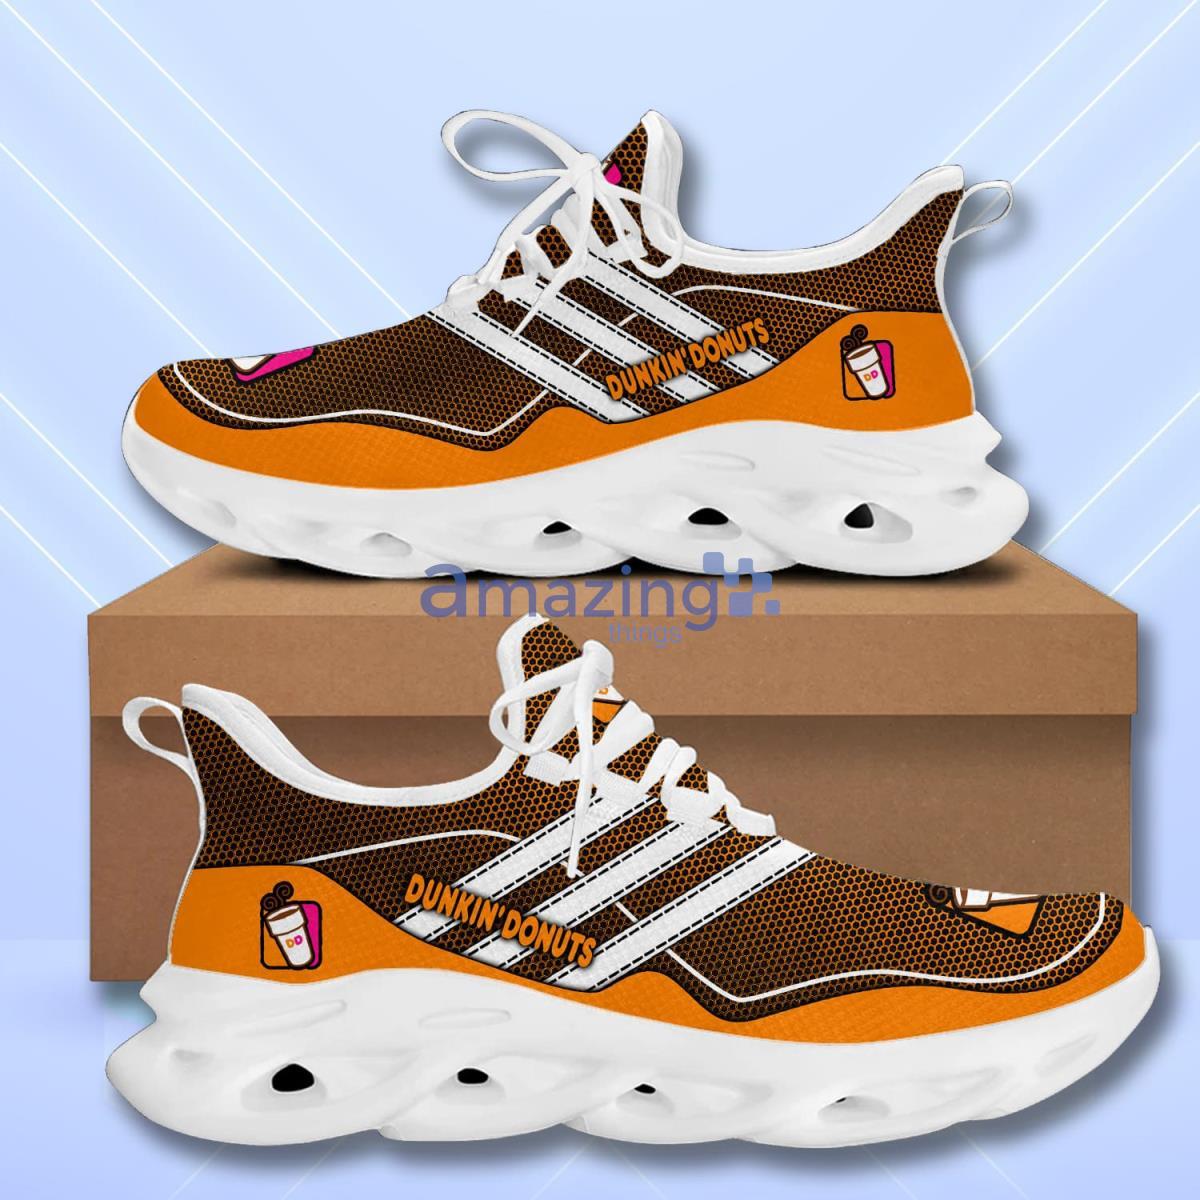 Dunkin’ Donuts Max Soul Shoes Hot Trending For Men Women Product Photo 2